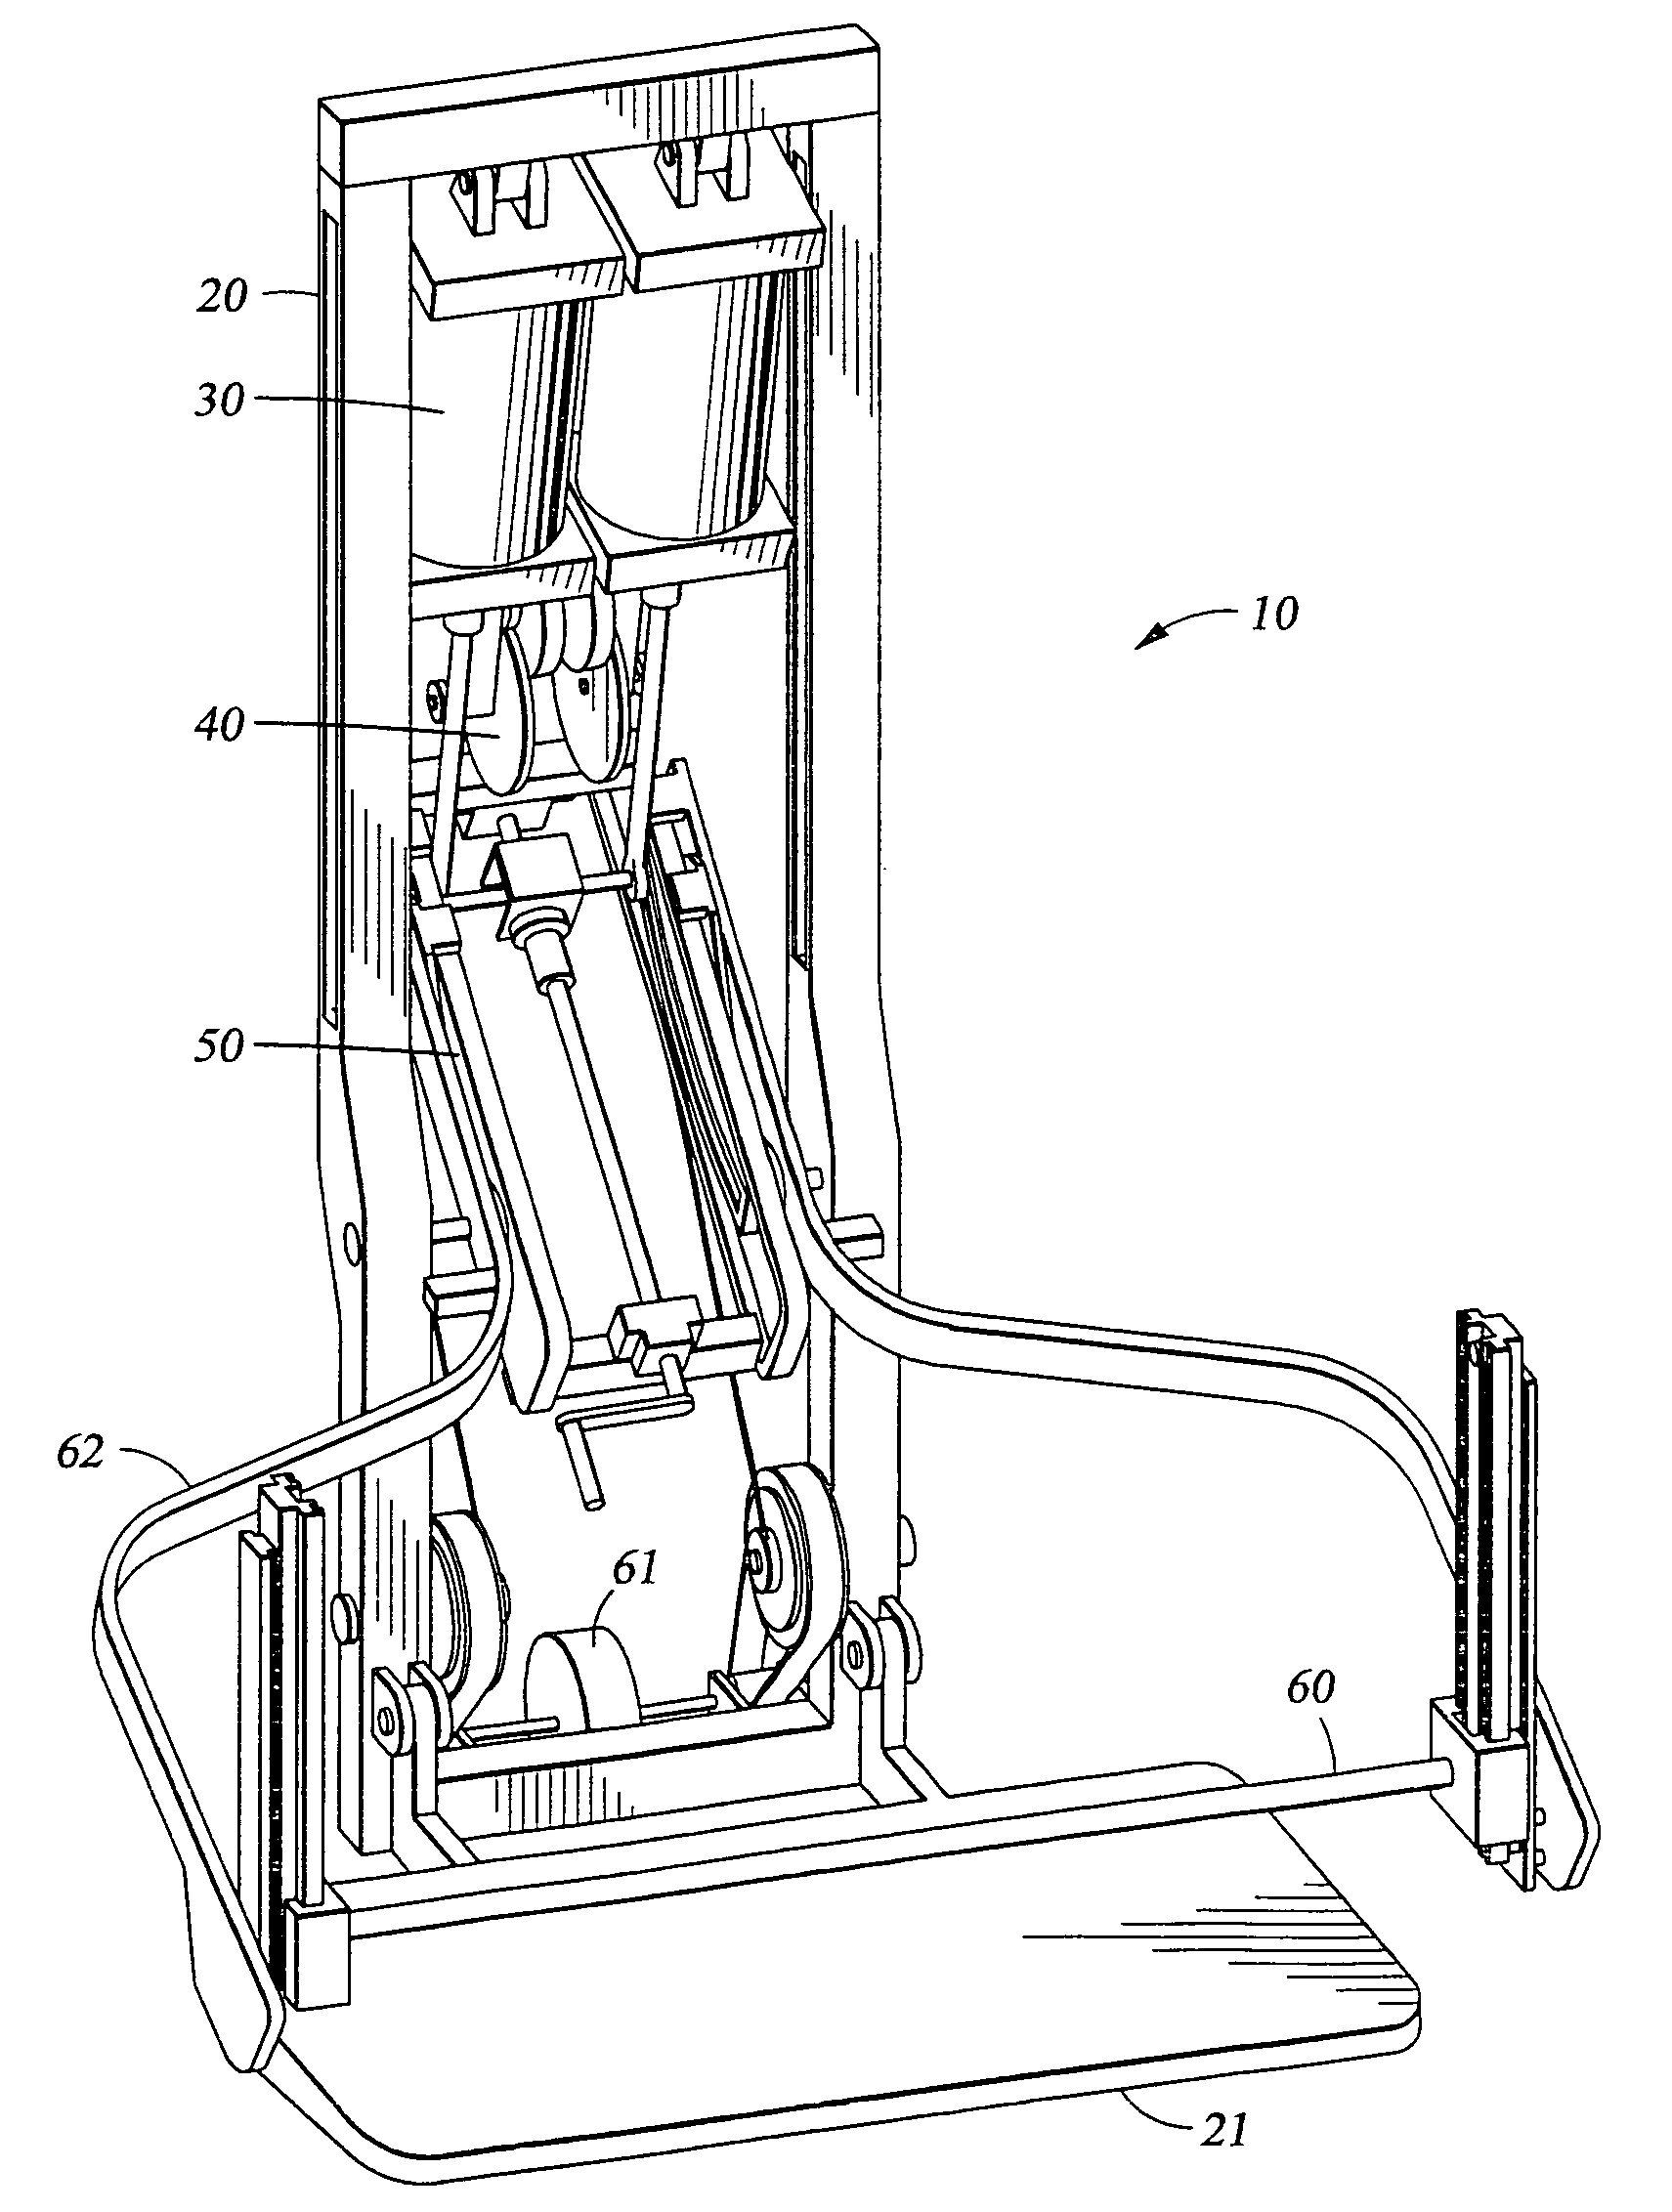 Advanced resistive exercise device